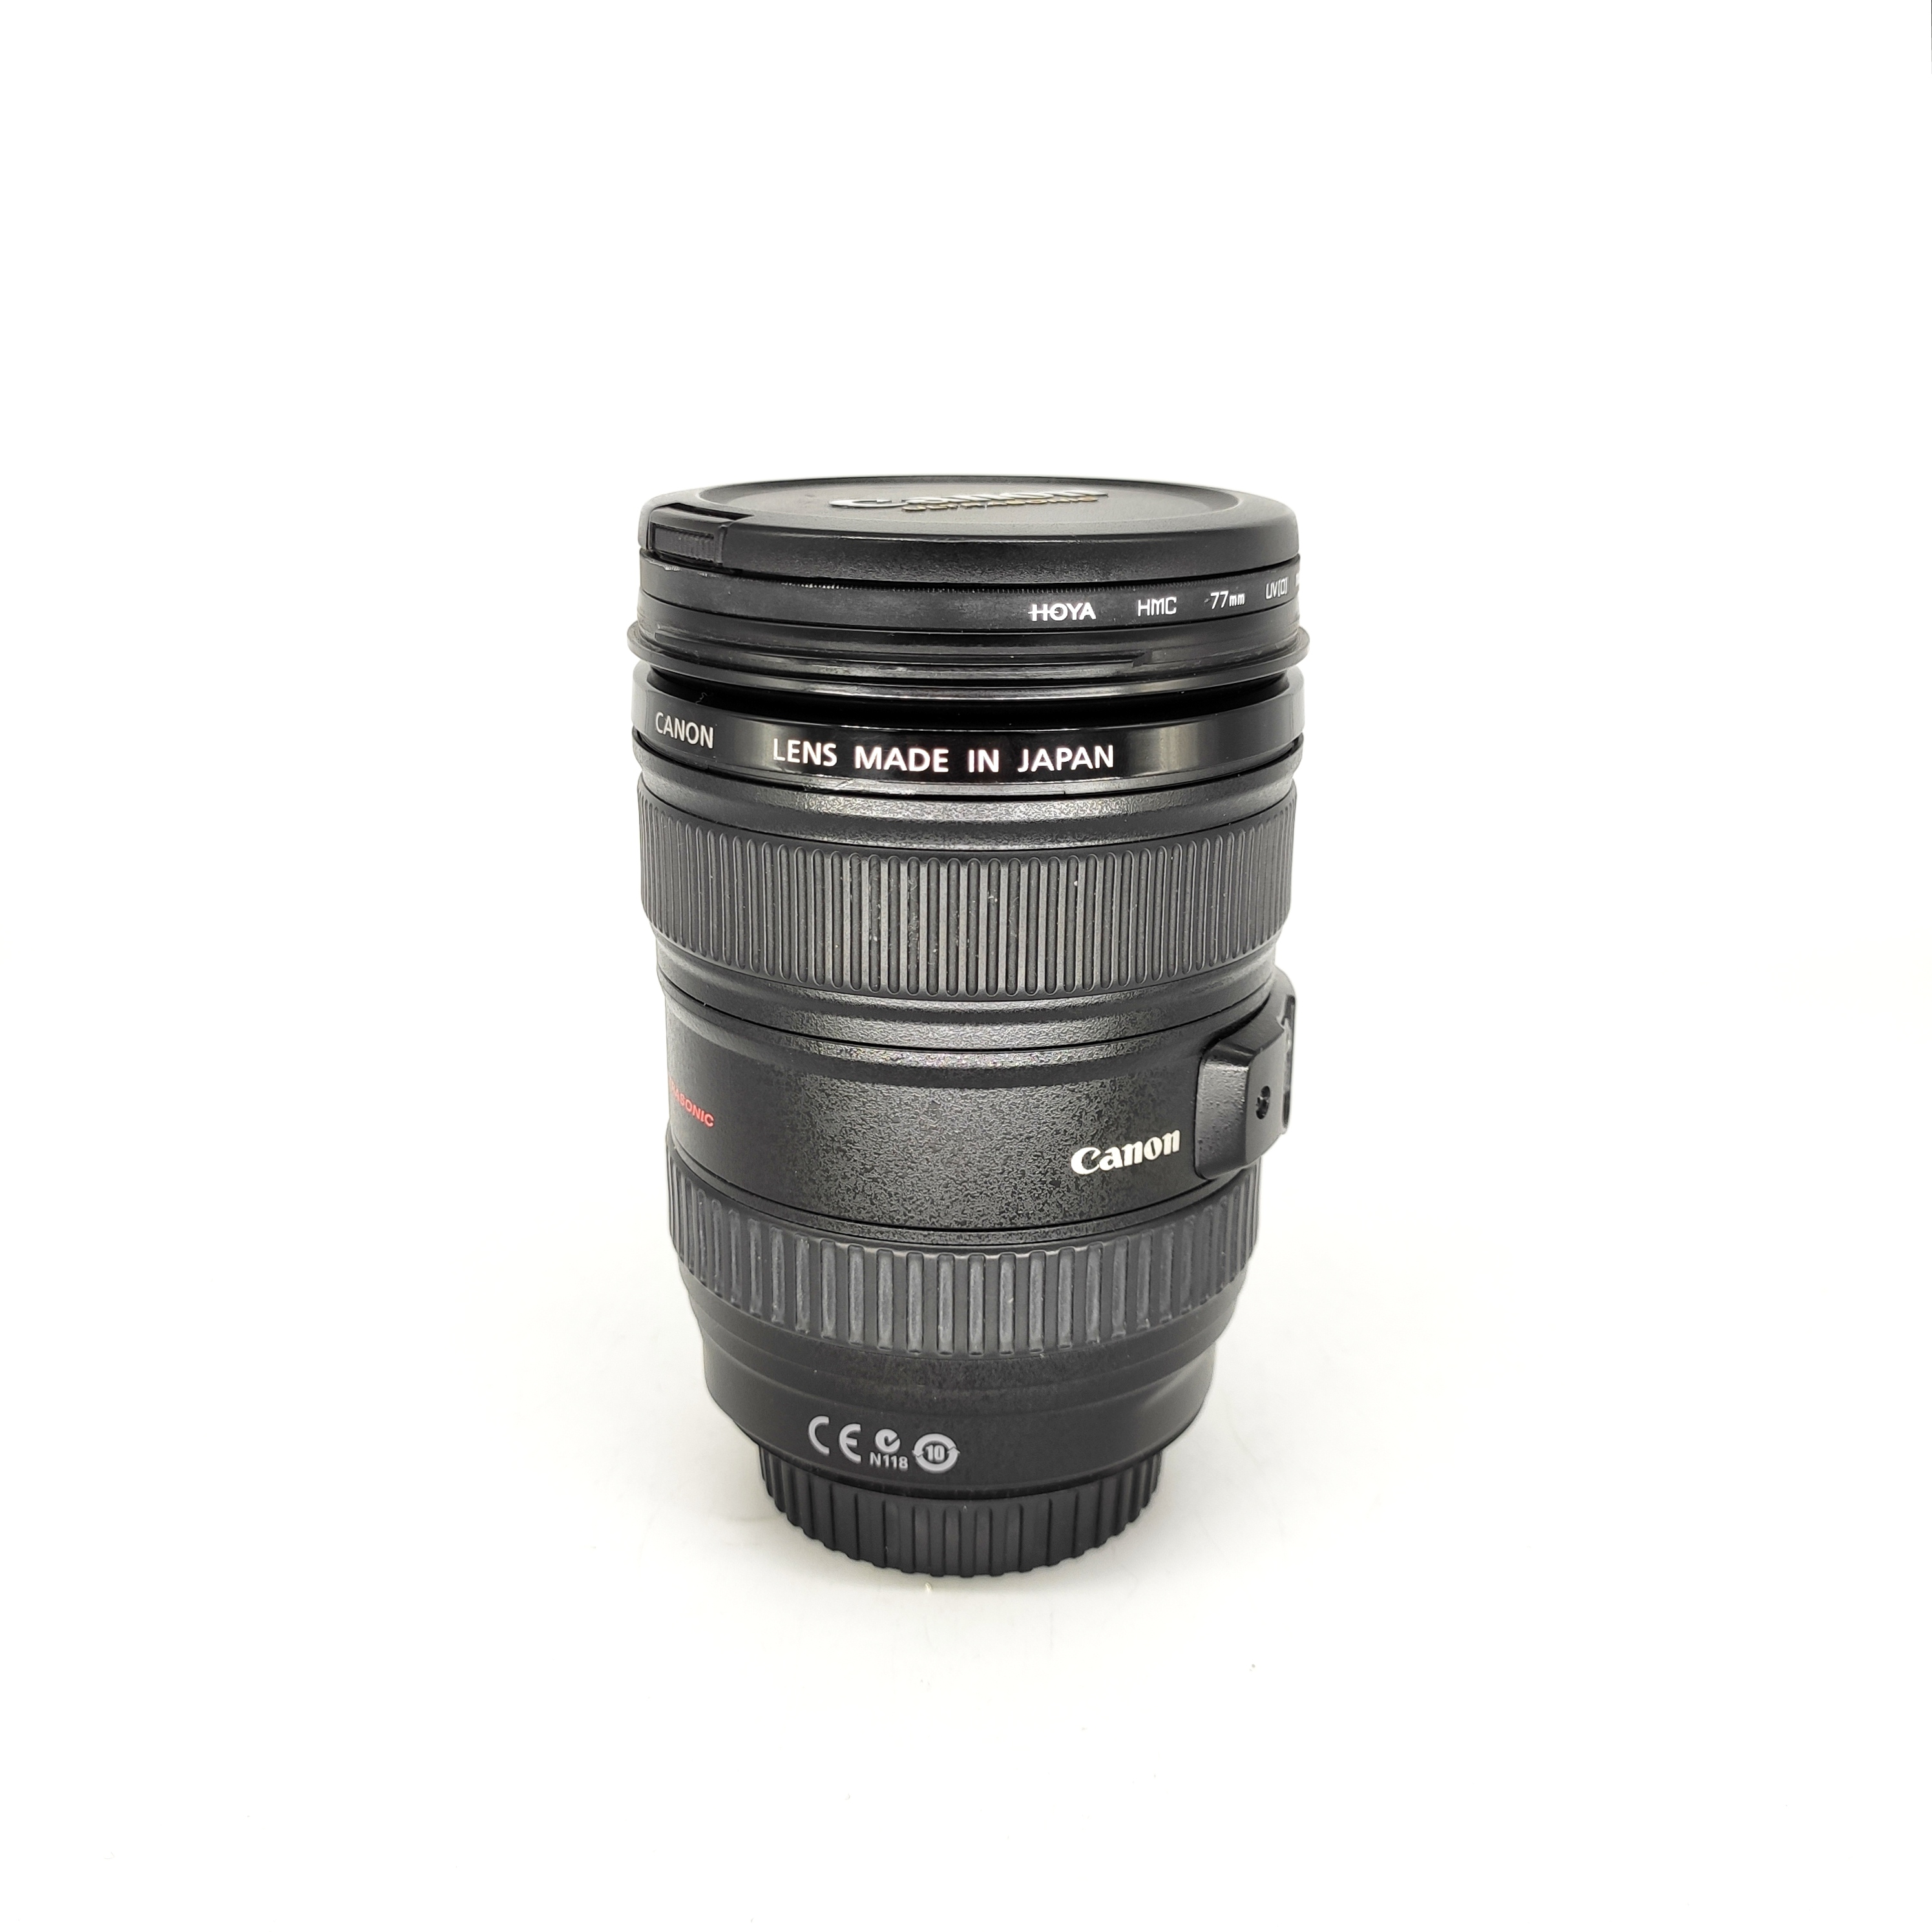  Canon EF 24-105mm f/4L IS USM ( 5-)